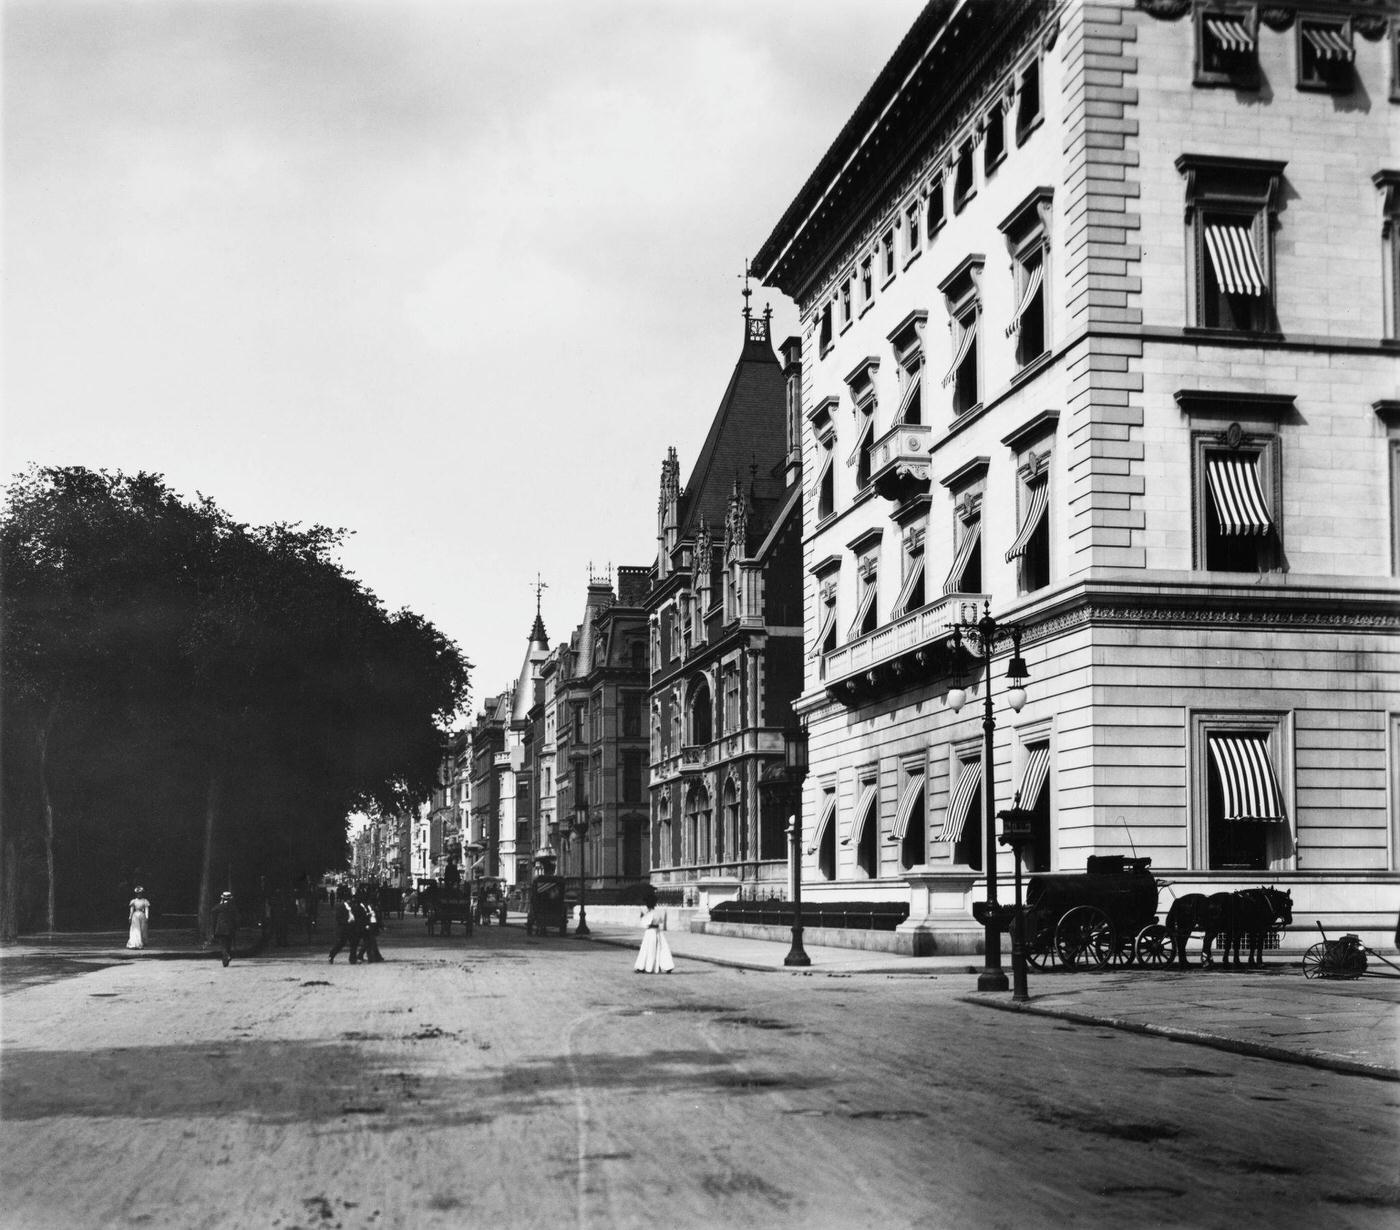 Metropolitan Club: Pedestrians And Horse-Drawn Carriages Outside The Clubhouse, Manhattan, New York City, 1895.